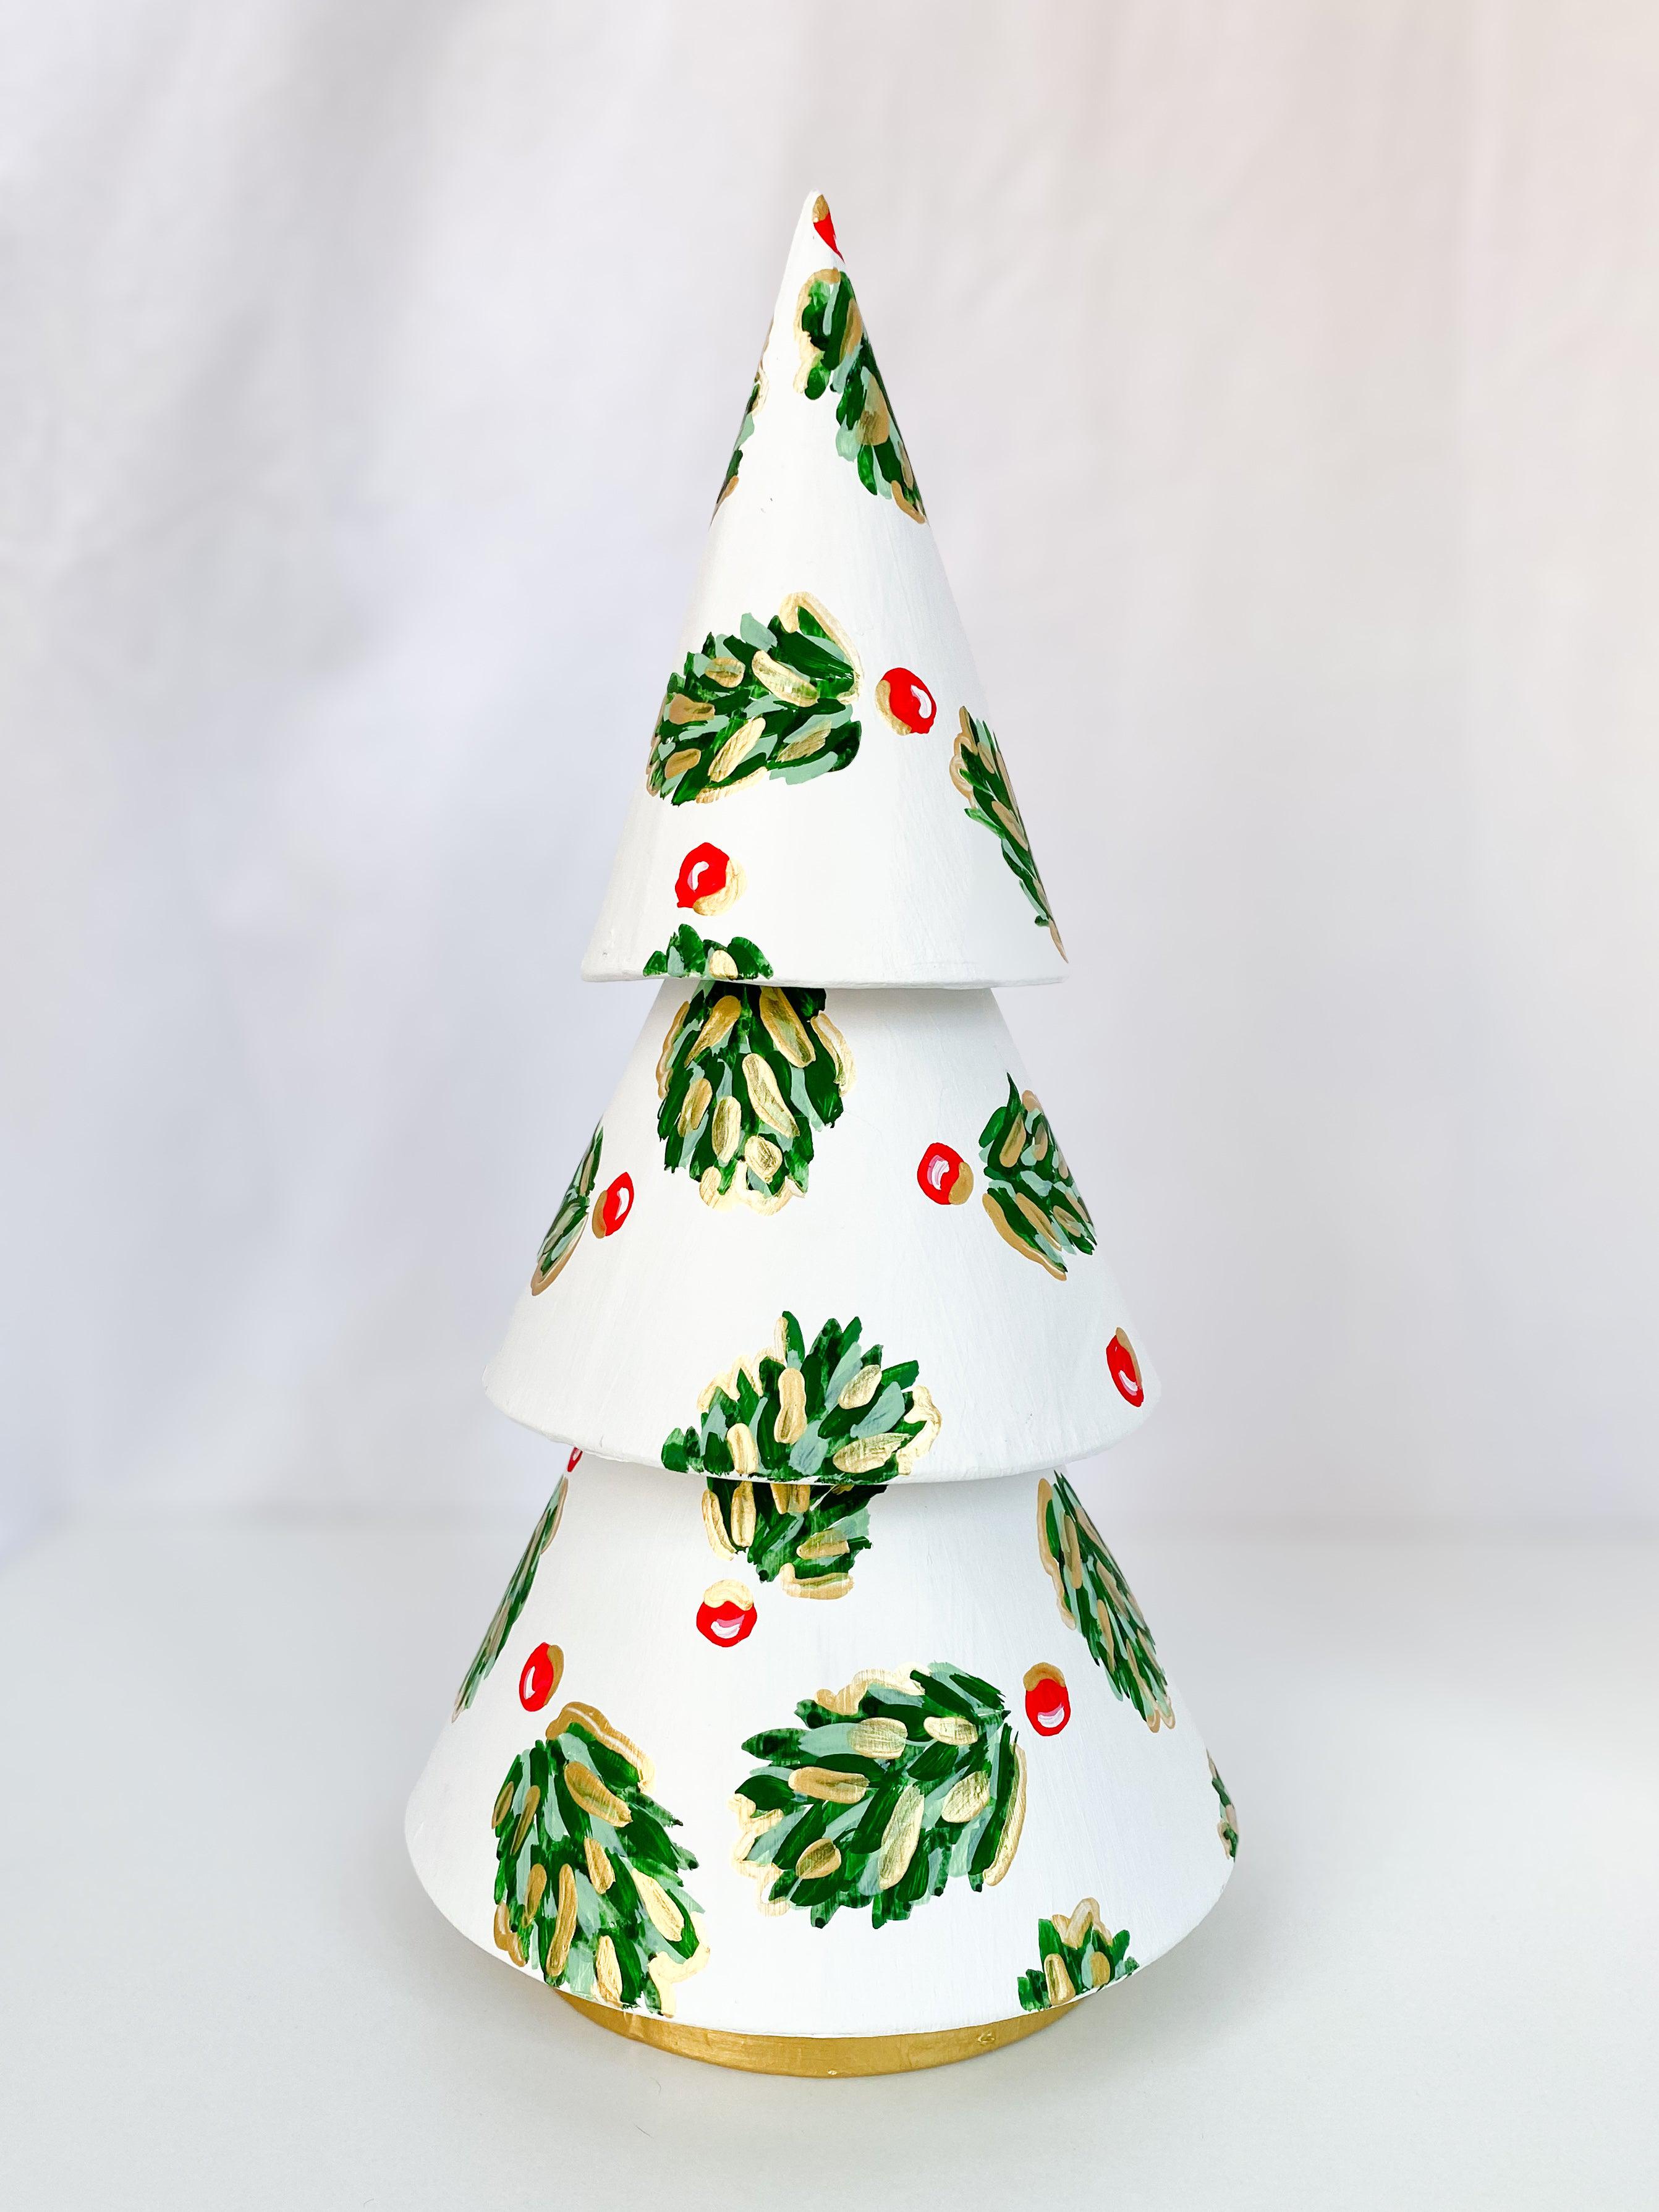 Winter Pearl Golden Holly Mini Tree - Tall-Hand-Painted Mini Christmas Tree | Measures 12" tall and approx. 6" wide | Features the Golden Holly design with an ivory base and shimmery gold accents and gold trunk | Light-weight and non-breakable paper mache tree | Coated with a protective matte finish that will keep it shimmering year after year | Each tree is slightly different with potential small imperfections due to the hand-painted nature, making each one special and unique!-The Singing Little Bird